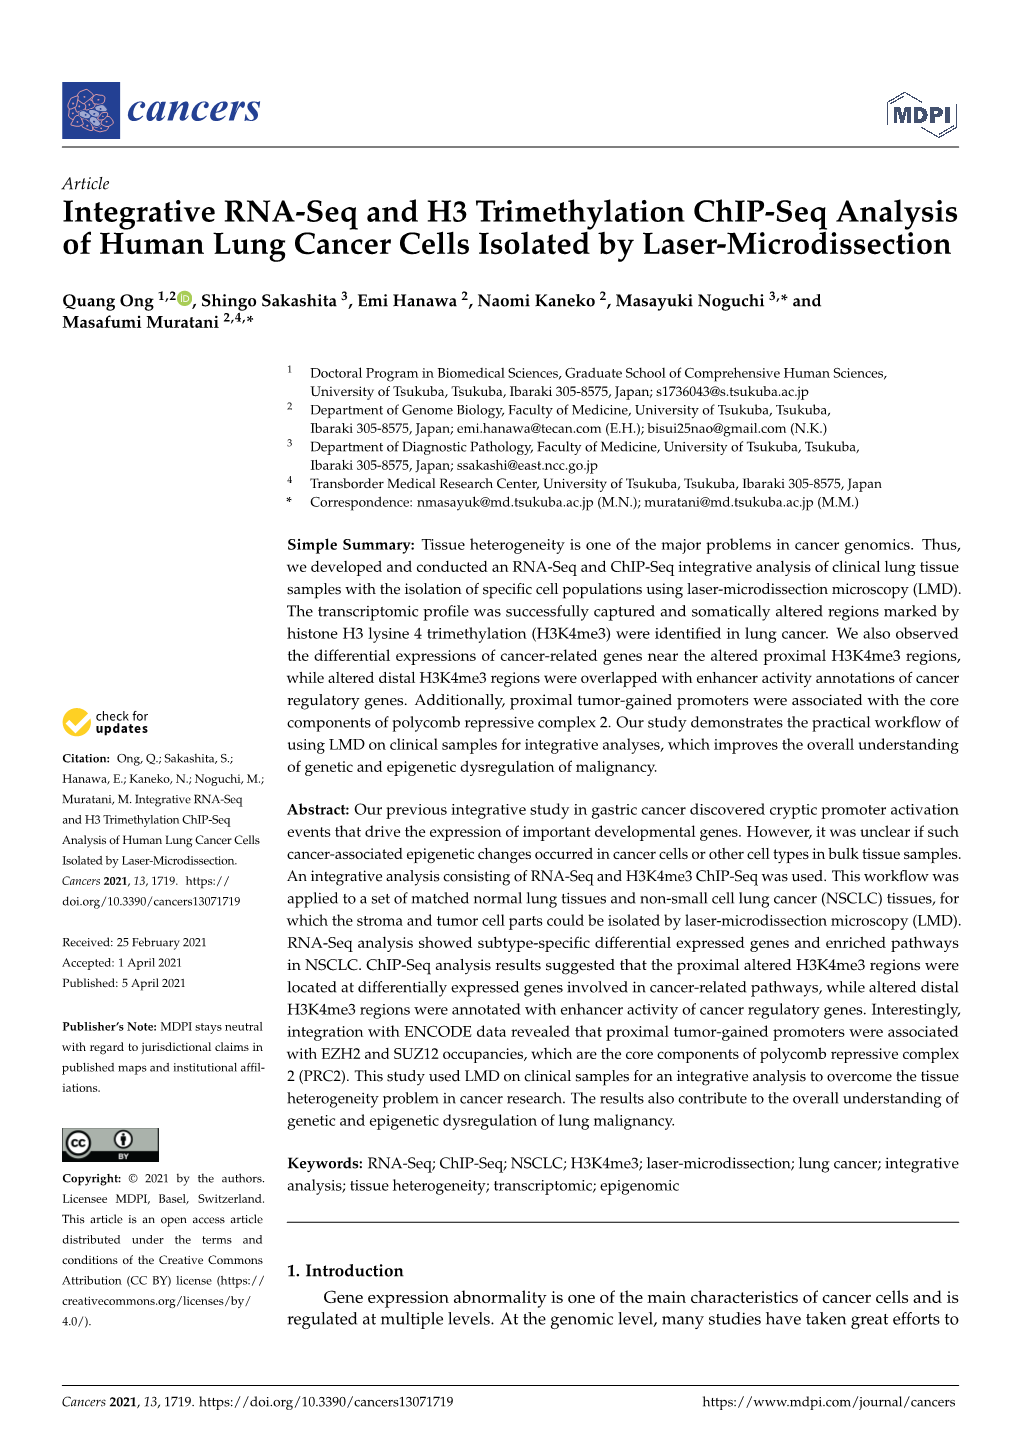 Integrative RNA-Seq and H3 Trimethylation Chip-Seq Analysis of Human Lung Cancer Cells Isolated by Laser-Microdissection